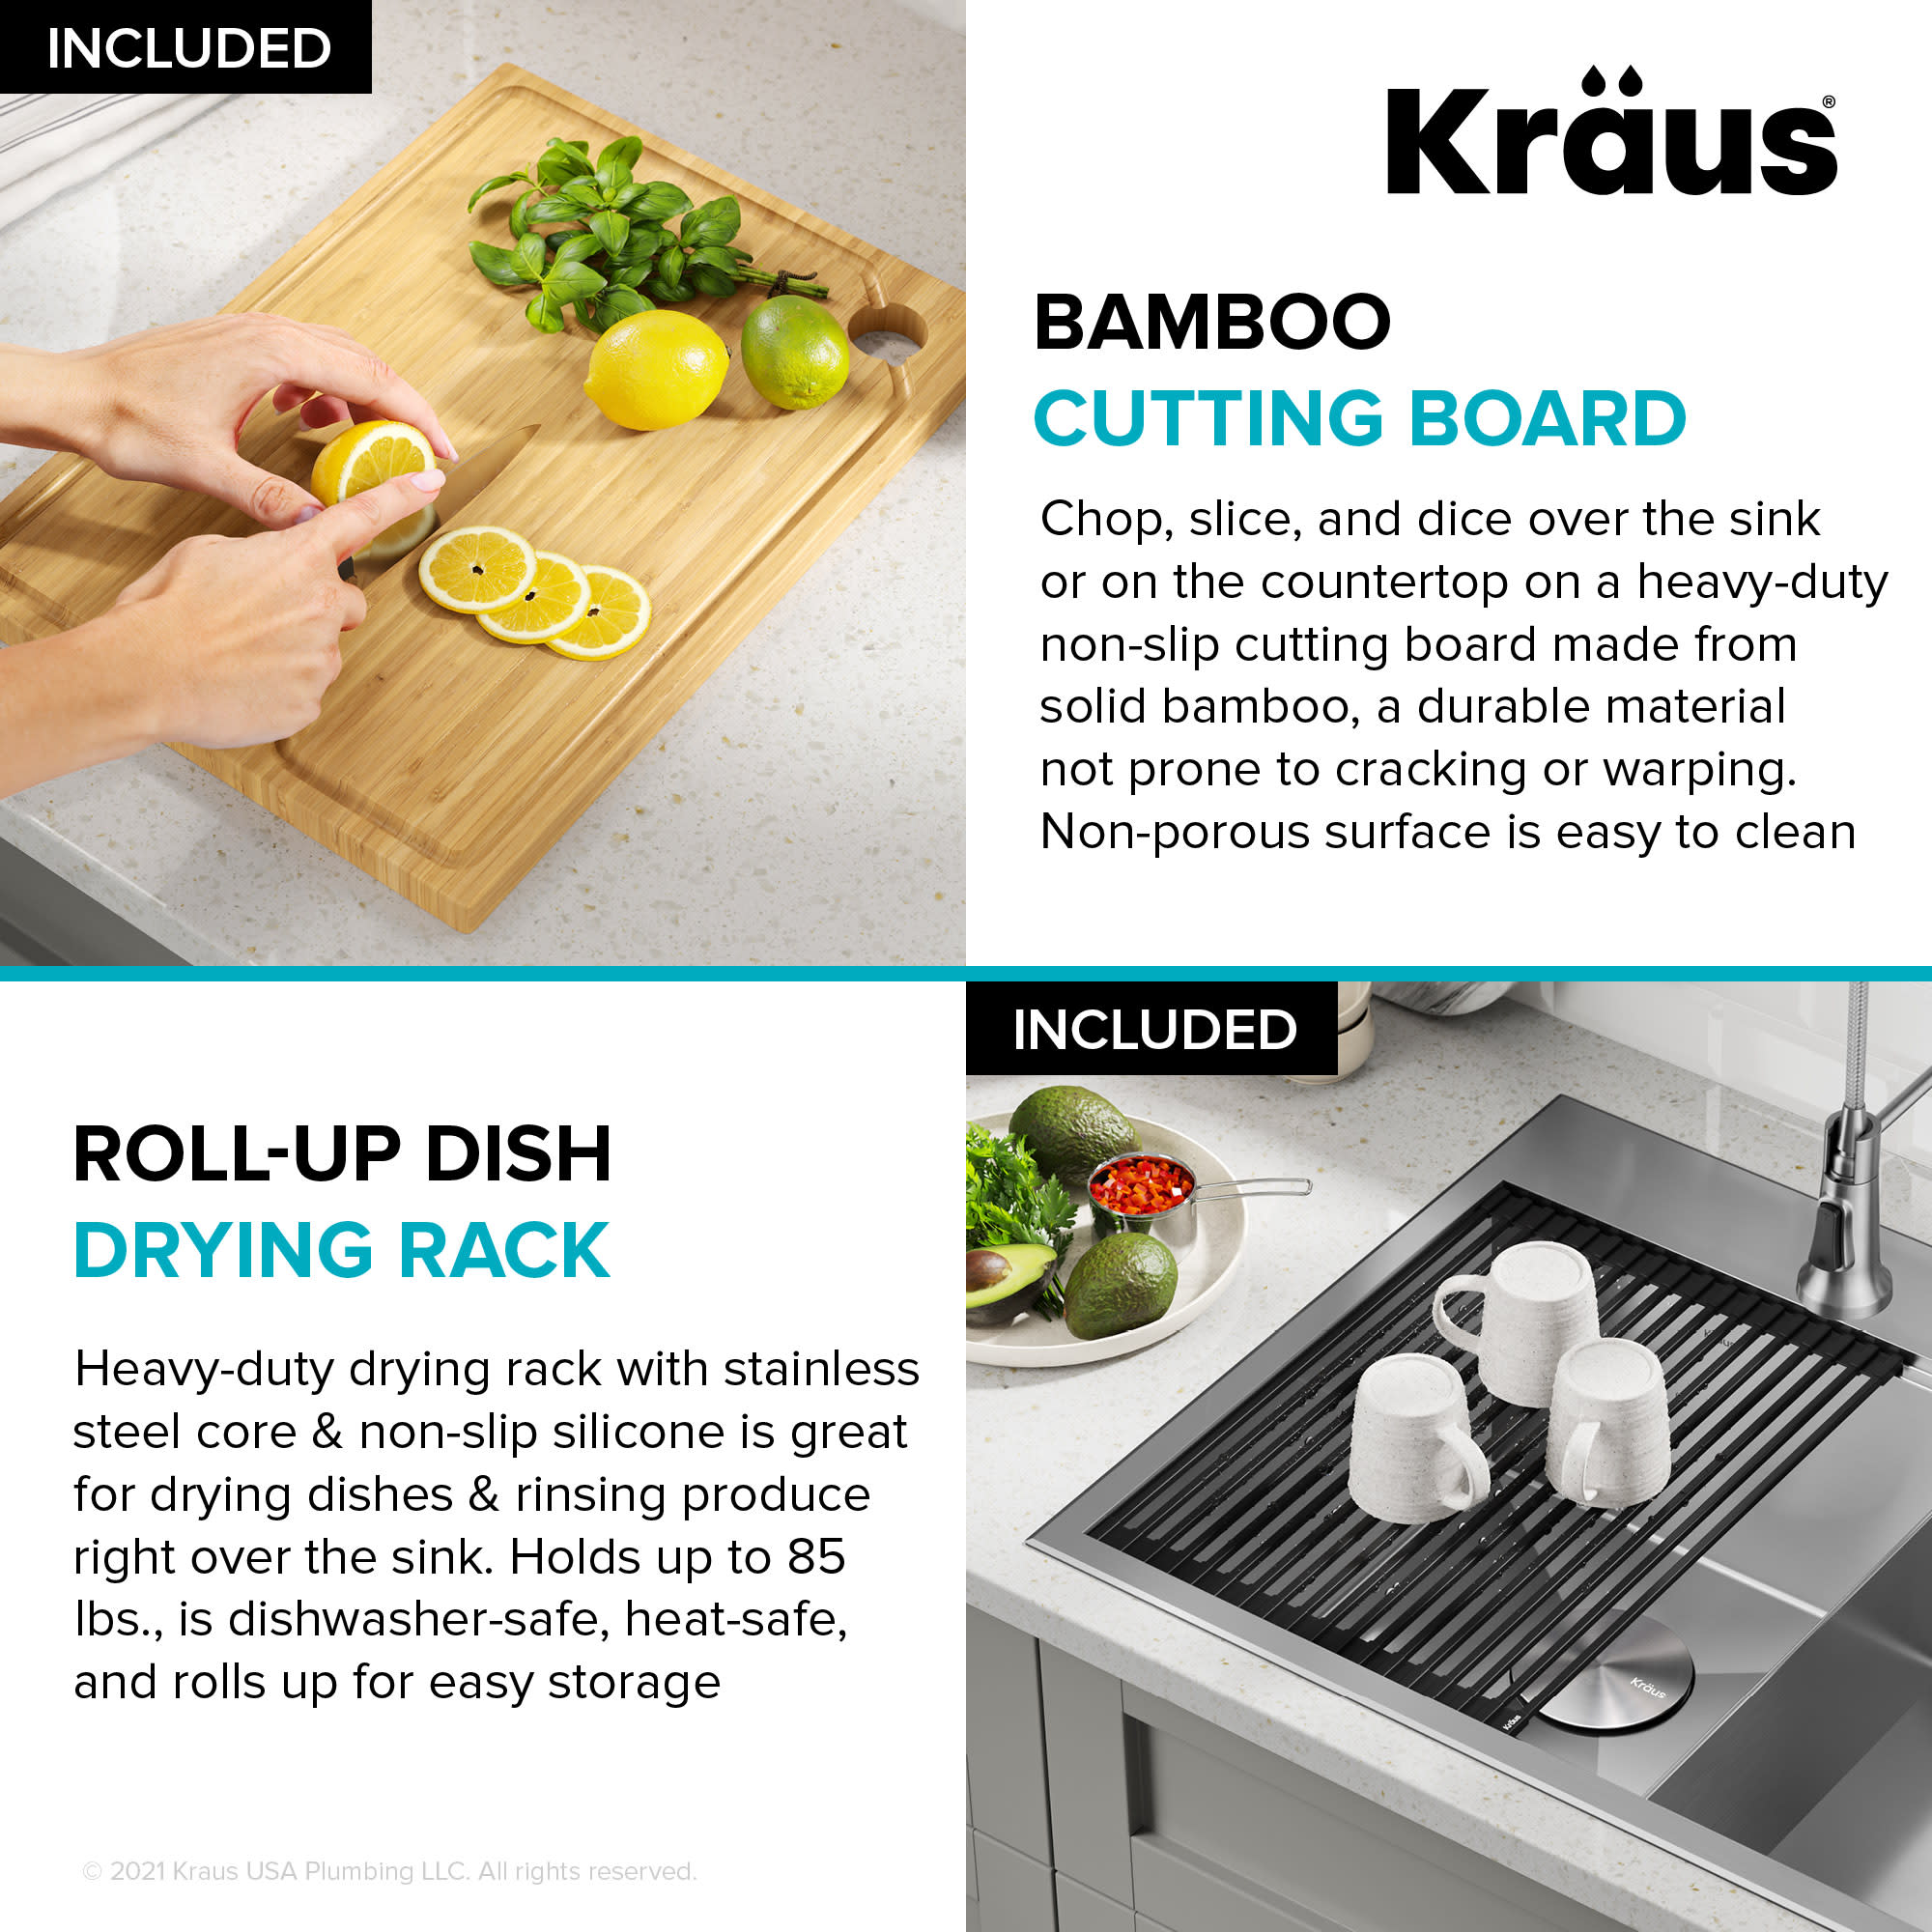 KRAUS Multipurpose Over Sink Roll-Up Dish Drying Rack in Grey  Replacing  kitchen countertops, Kitchen countertops, Dish rack drying